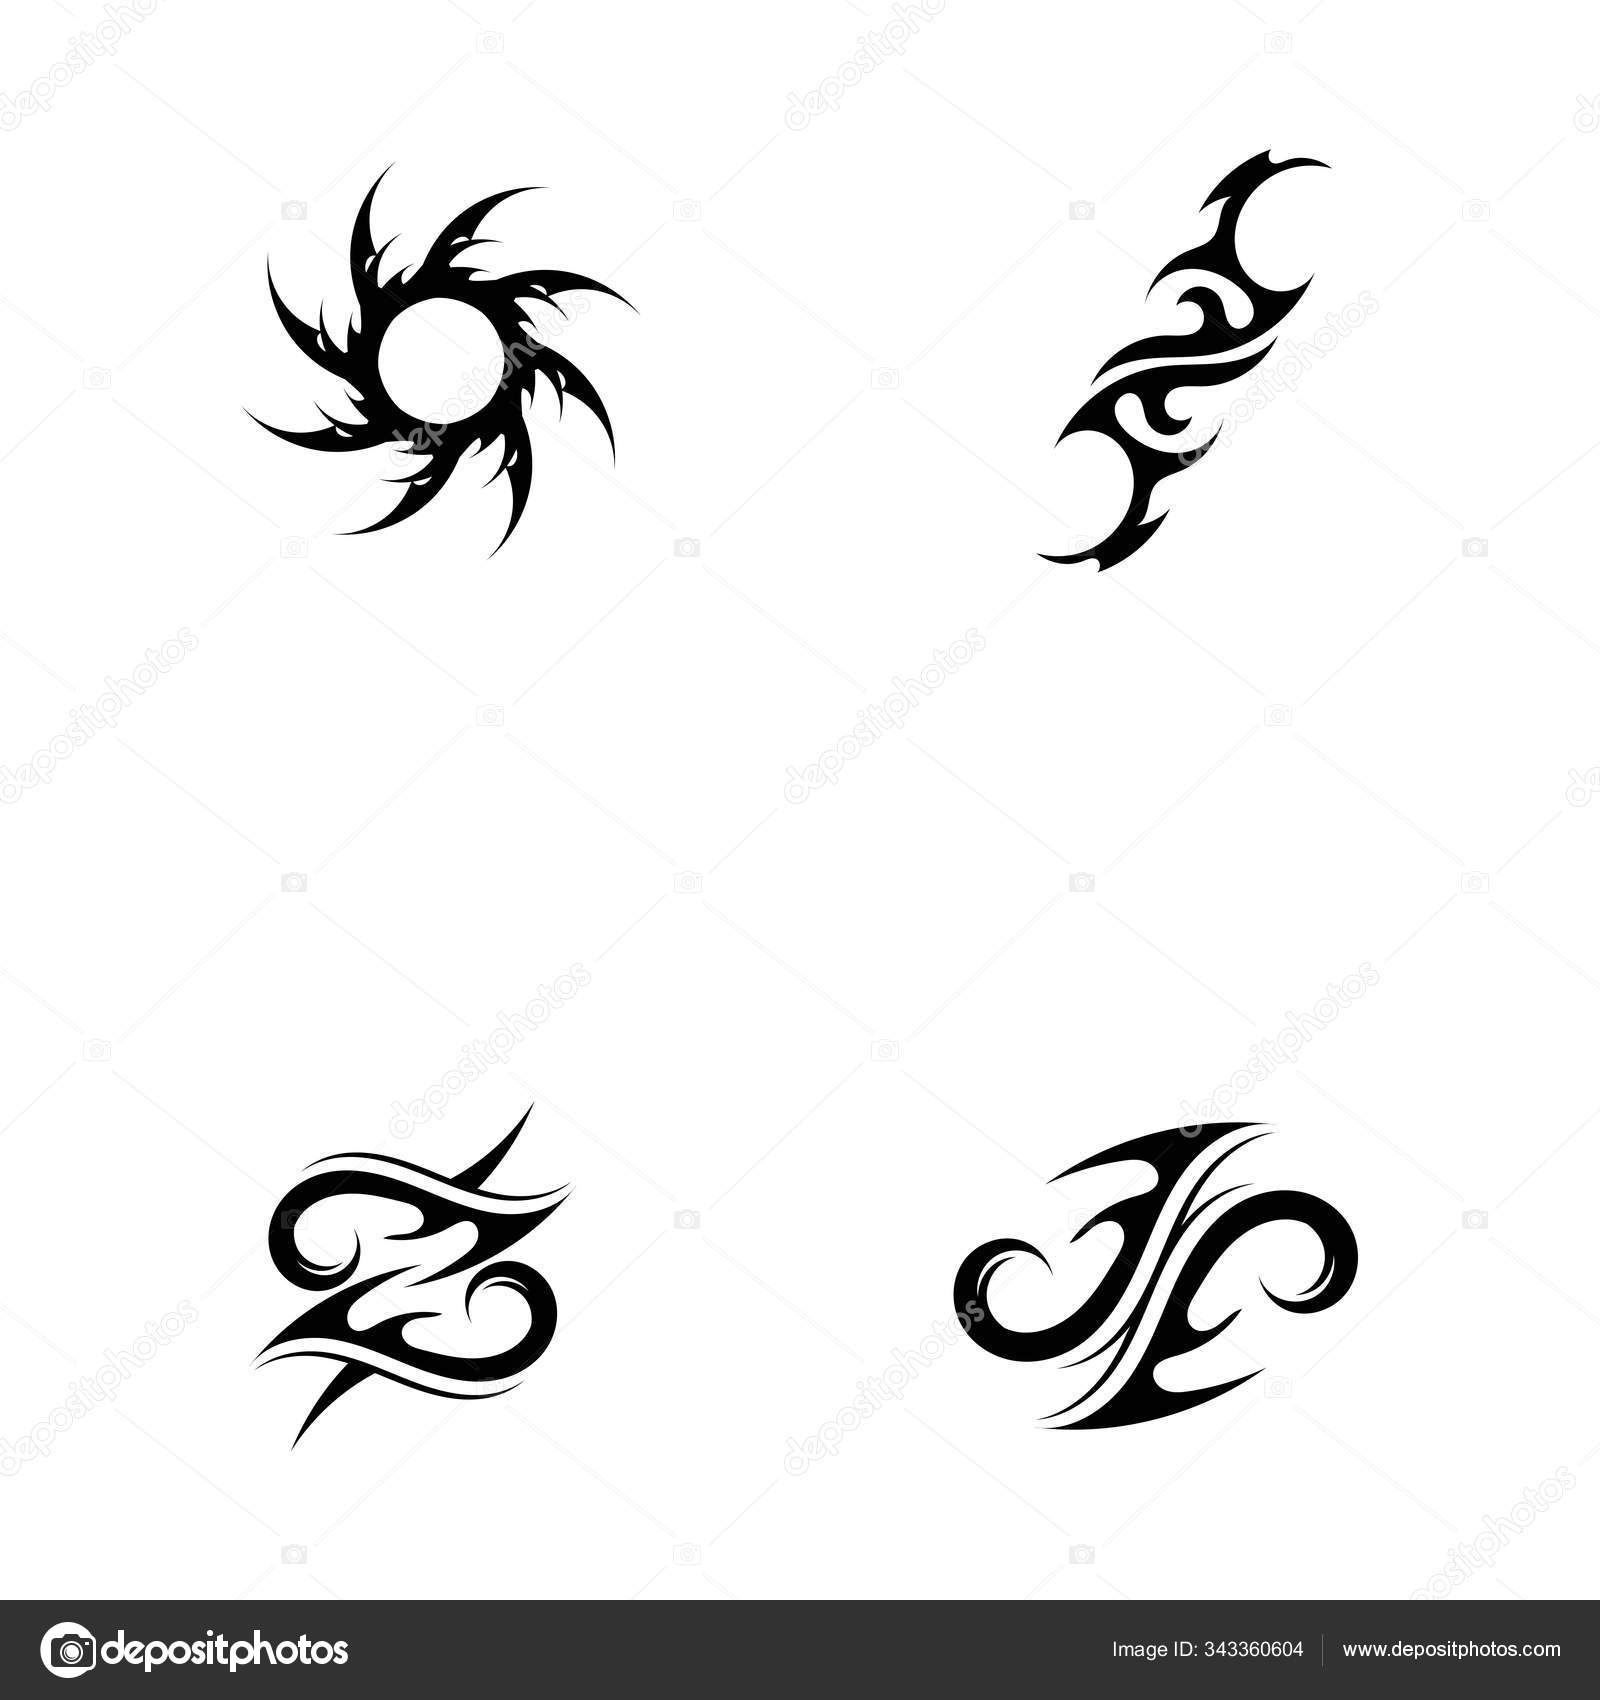 Tribal tattoos design sketches set Royalty Free Vector Image